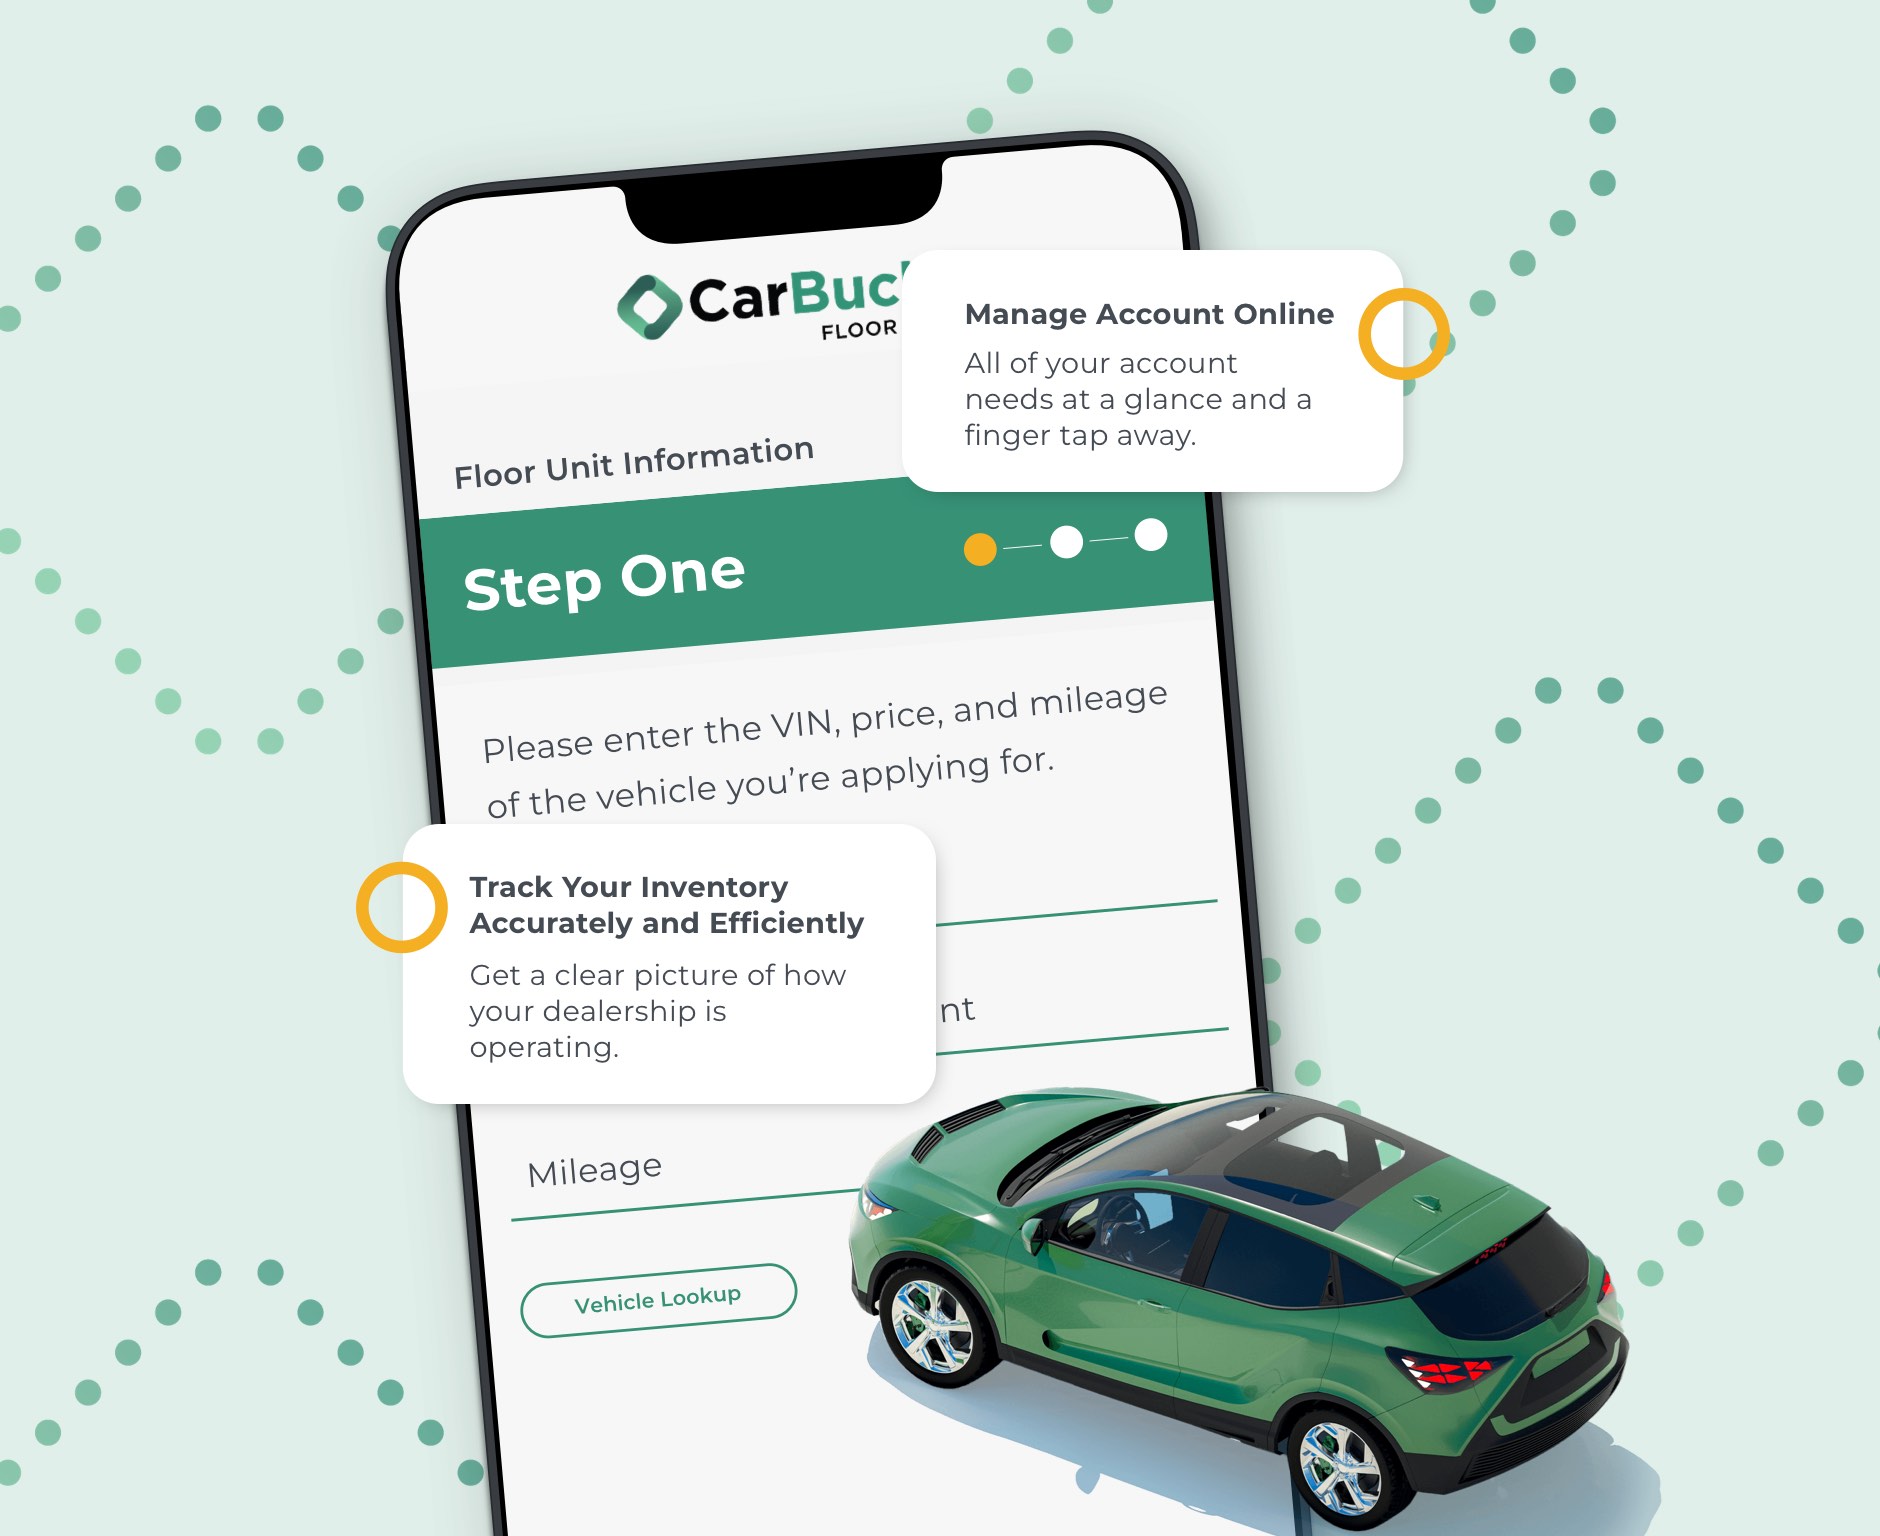 A phone with the CarBucks app on the screen, text callouts and a green car.